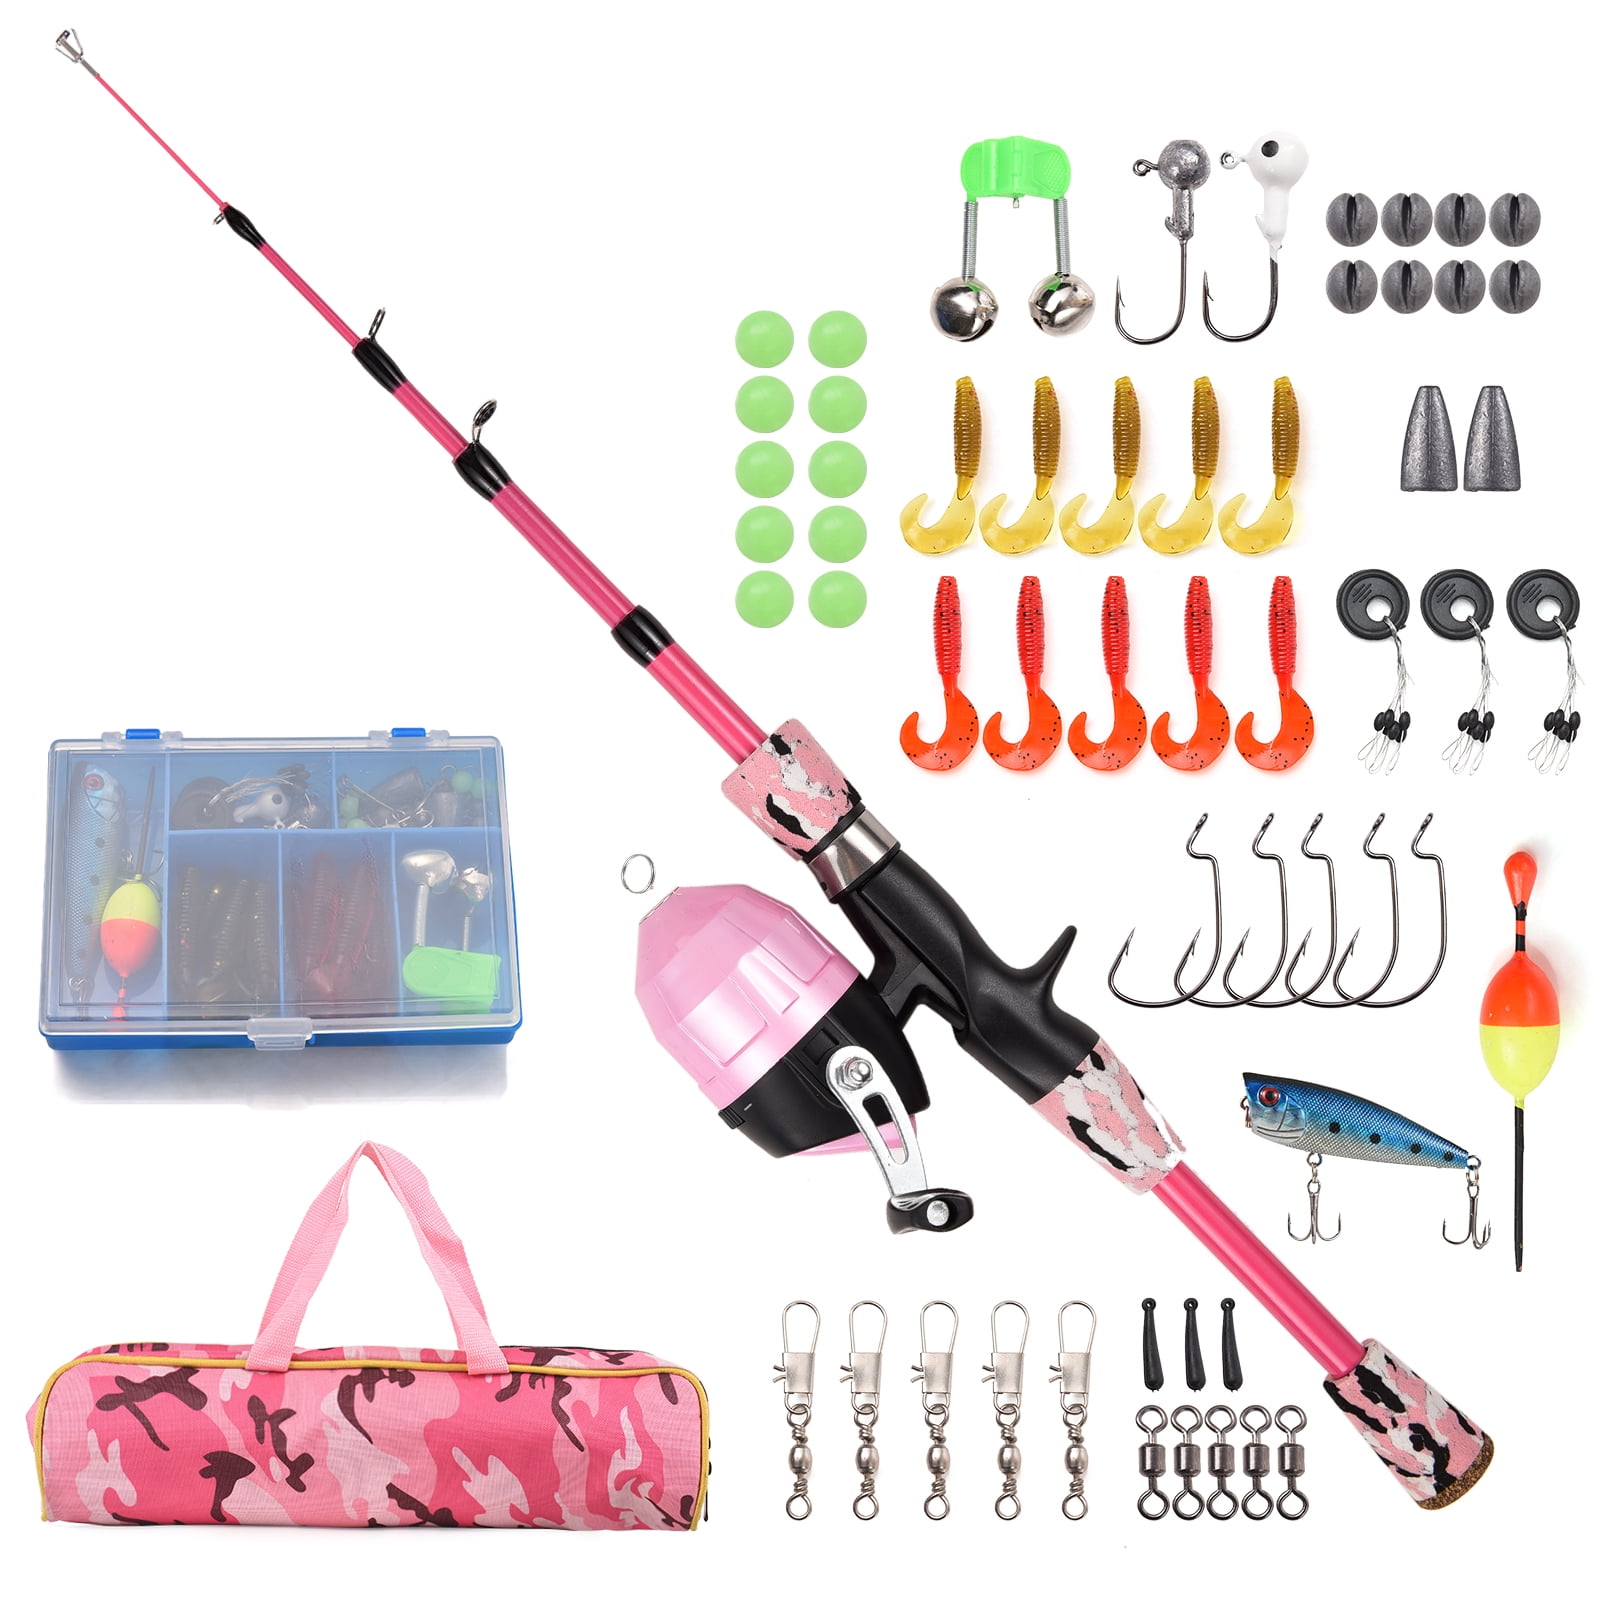 SPRING PARK Kids Fishing Pole Telescopic Fishing Pod All-in-One Fishing Kit  with Travel Box and Reel Kit for Boys, Girls, Or Youth 